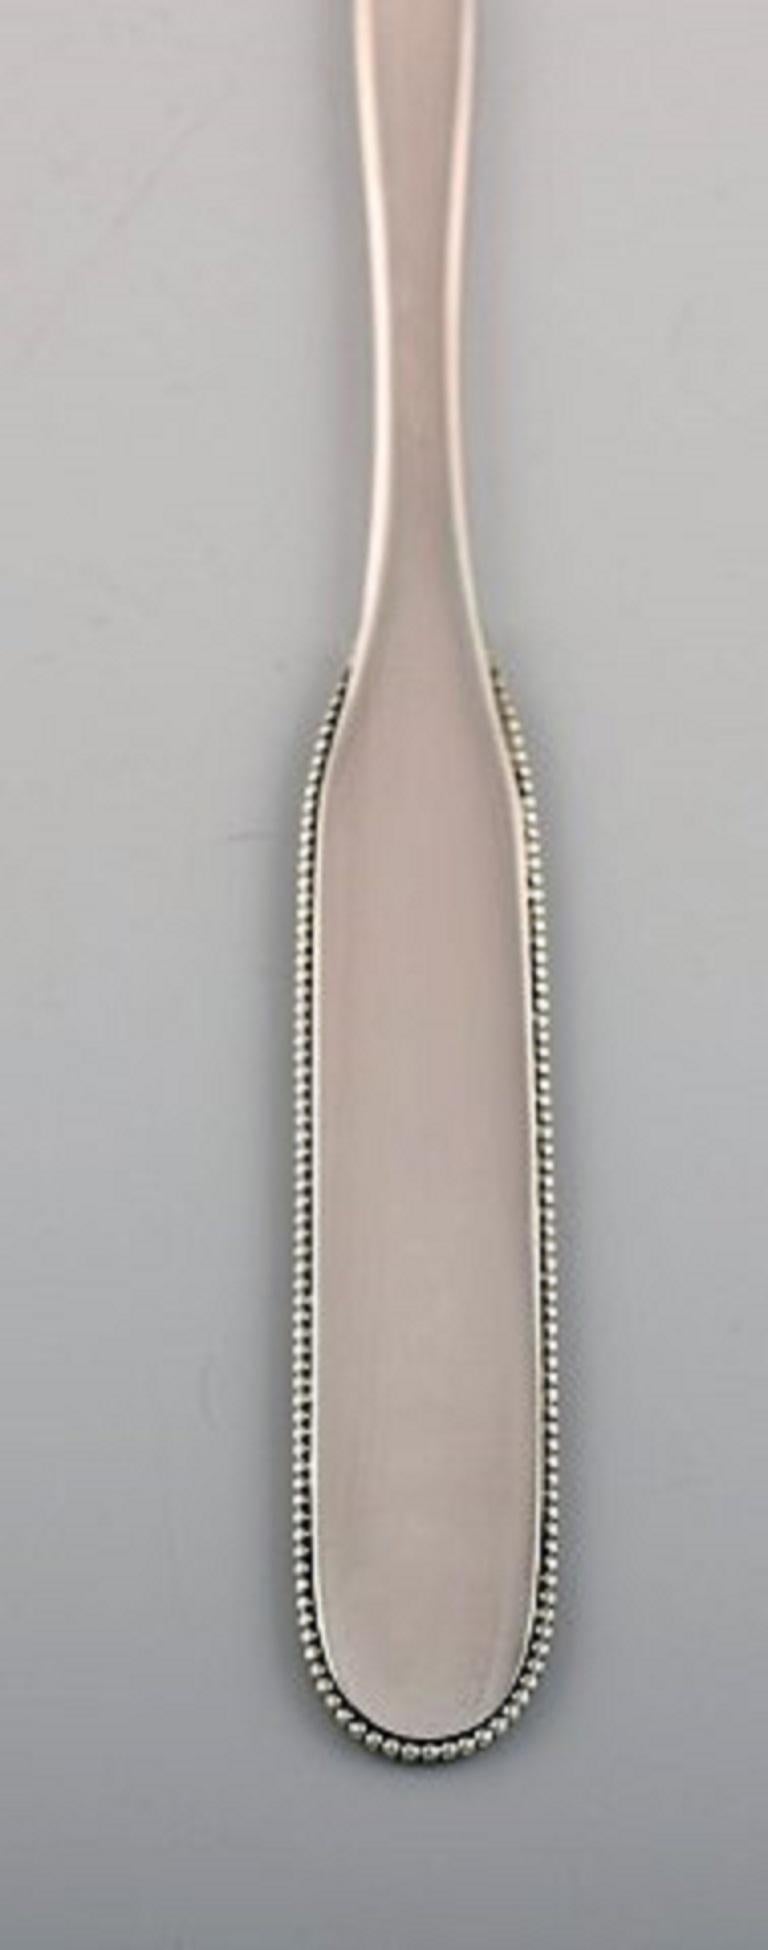 Evald Nielsen number 14 lobster fork in hammered silver. 1920s.
Measures: Length: 19 cm.
In excellent condition.
Our skilled Georg Jensen silversmith / goldsmith can polish all silver and gold so that it looks like new. The price is very